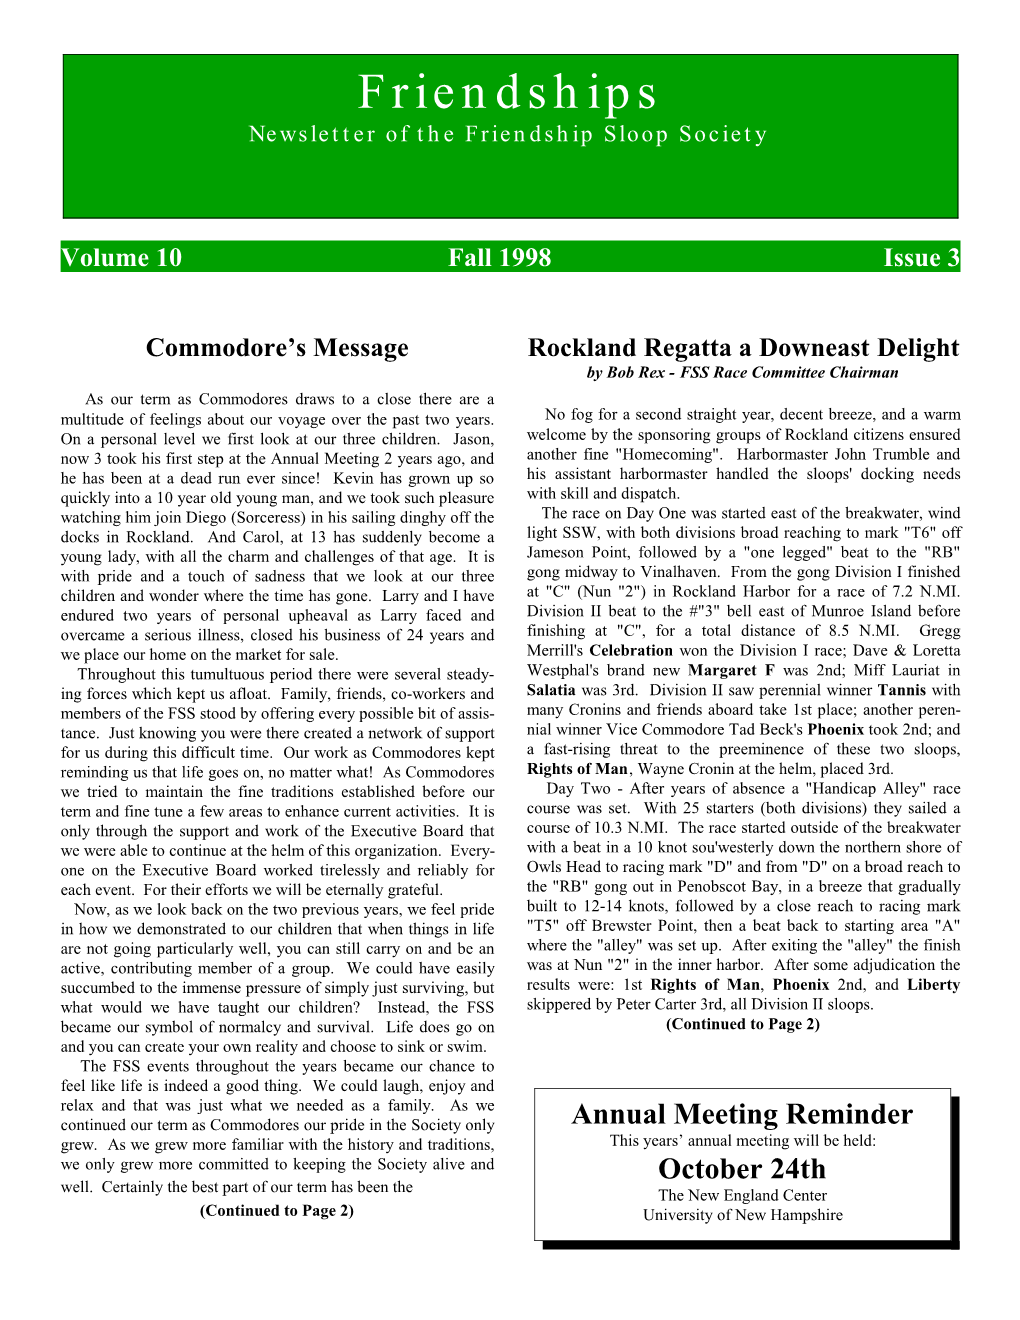 Fall 1998 Issue 3